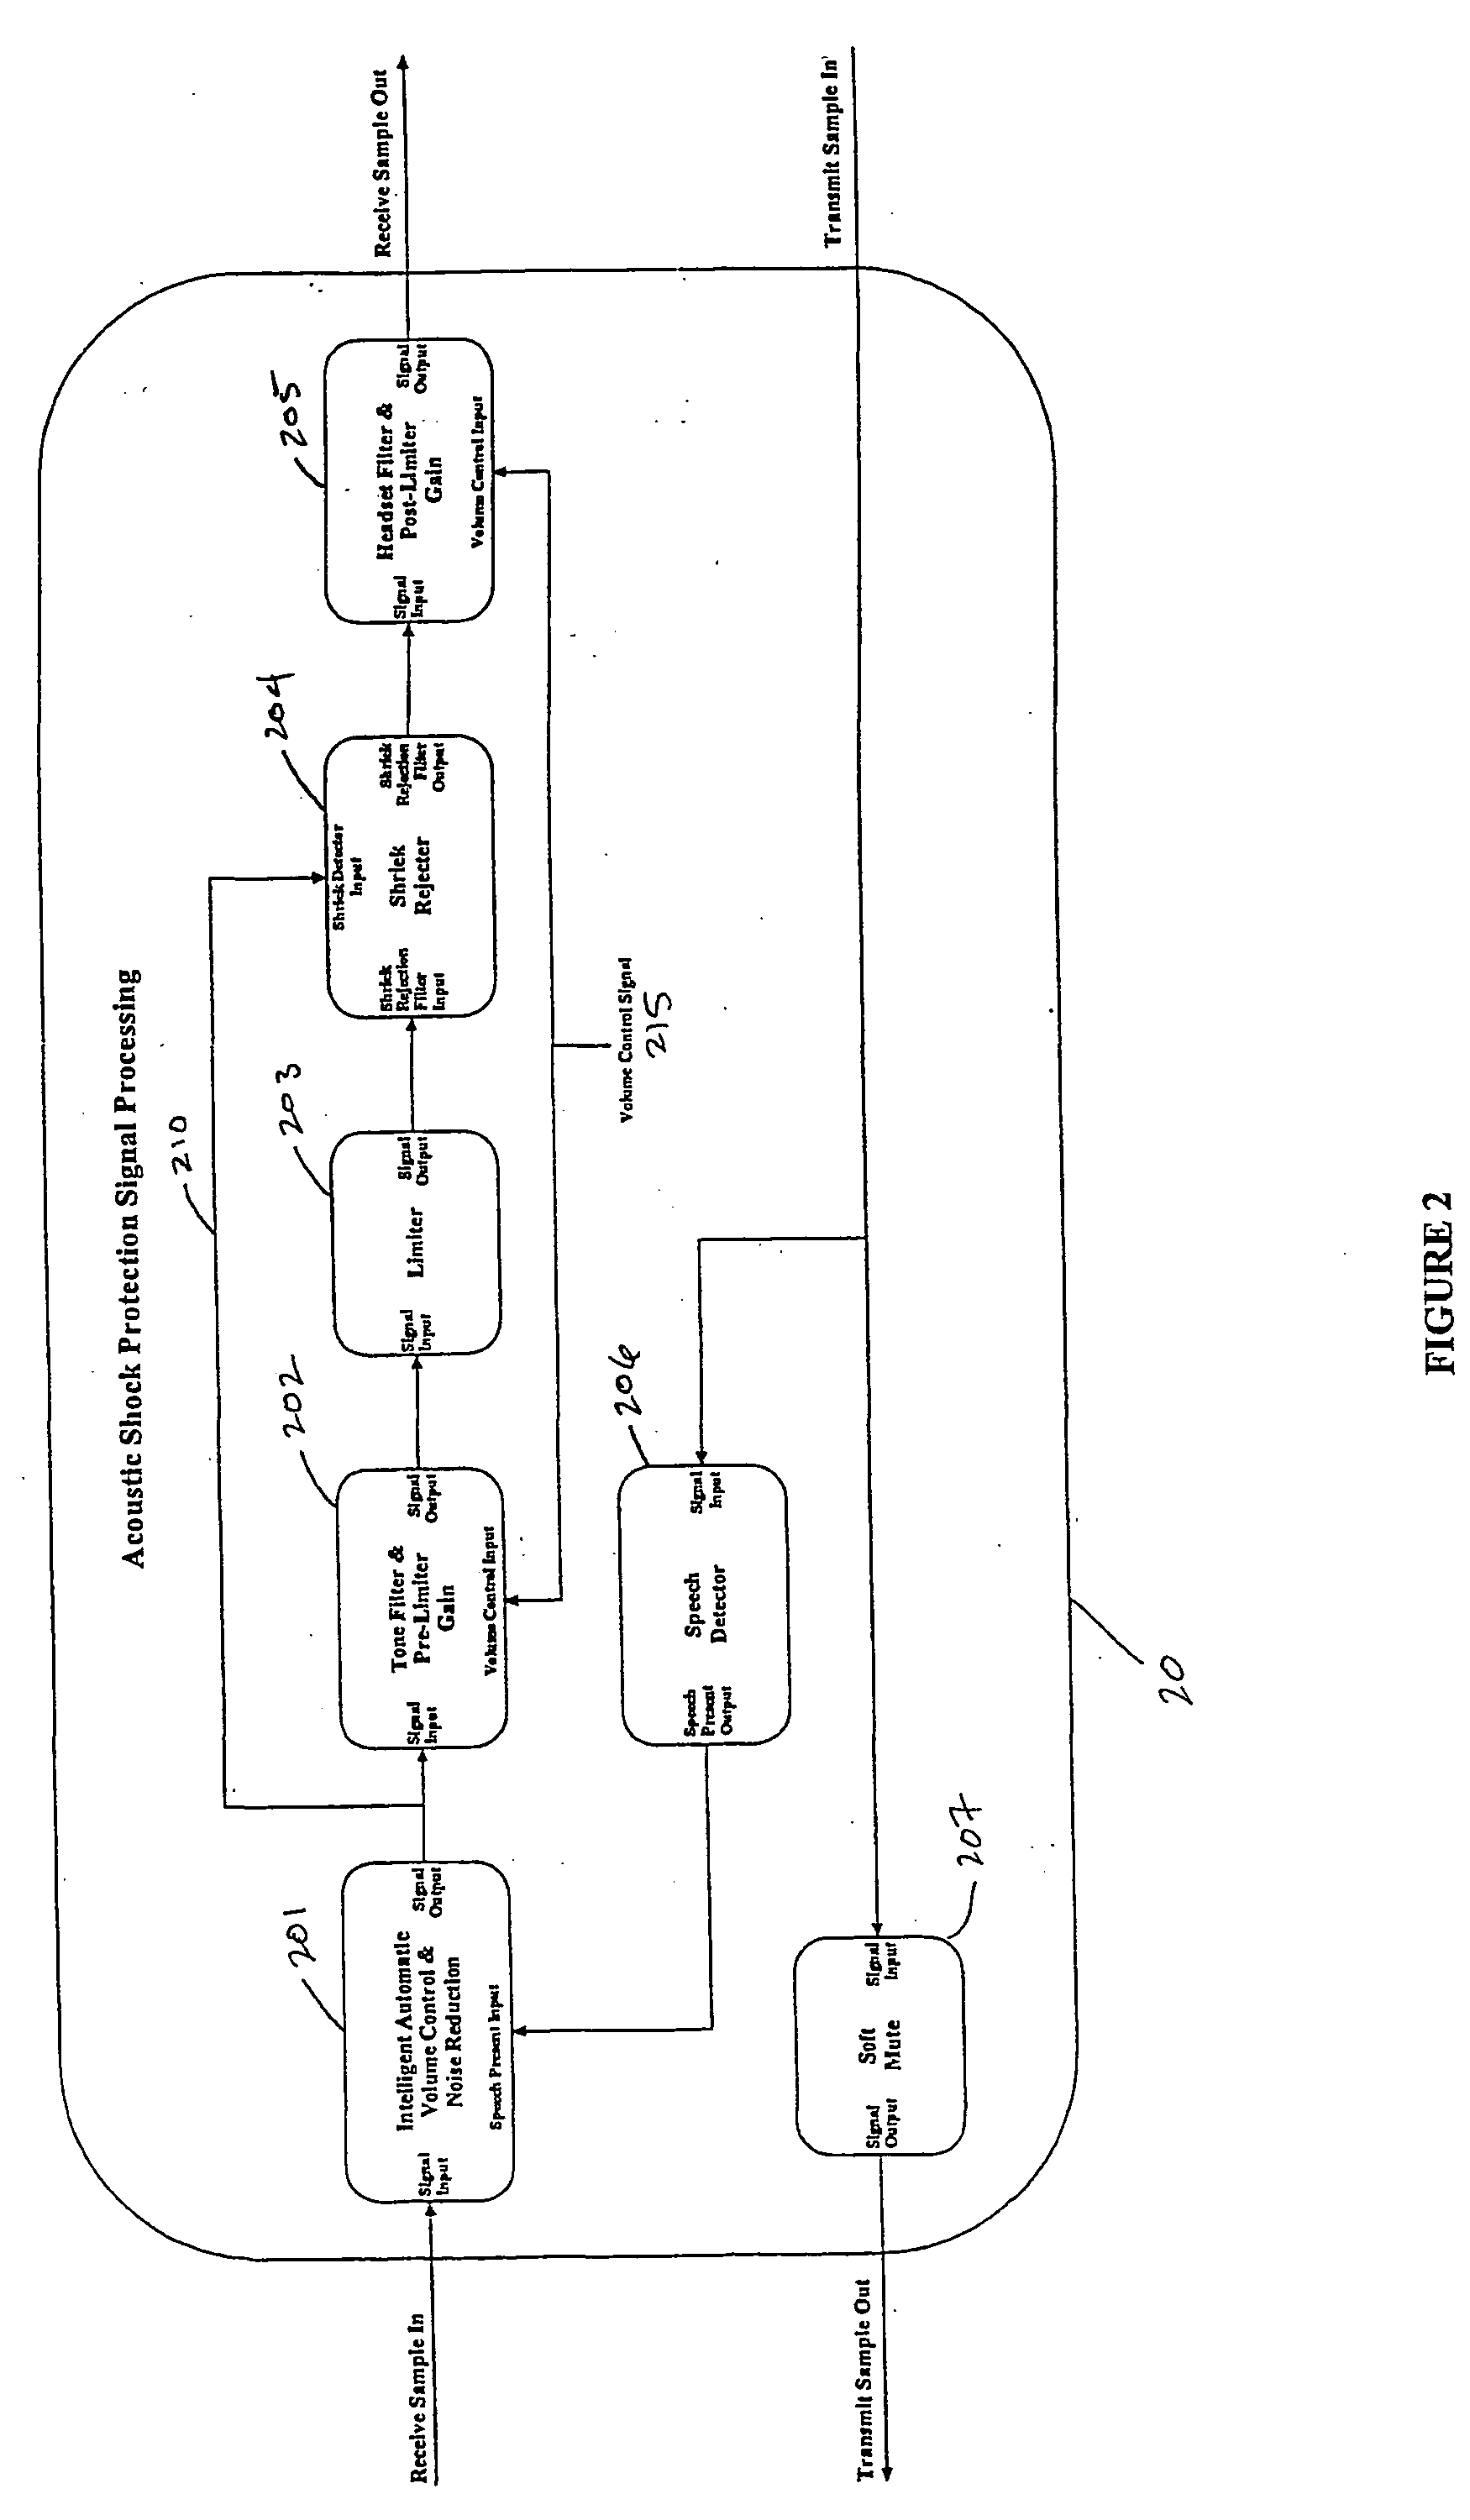 Digital signal processing system and method for a telephony interface apparatus